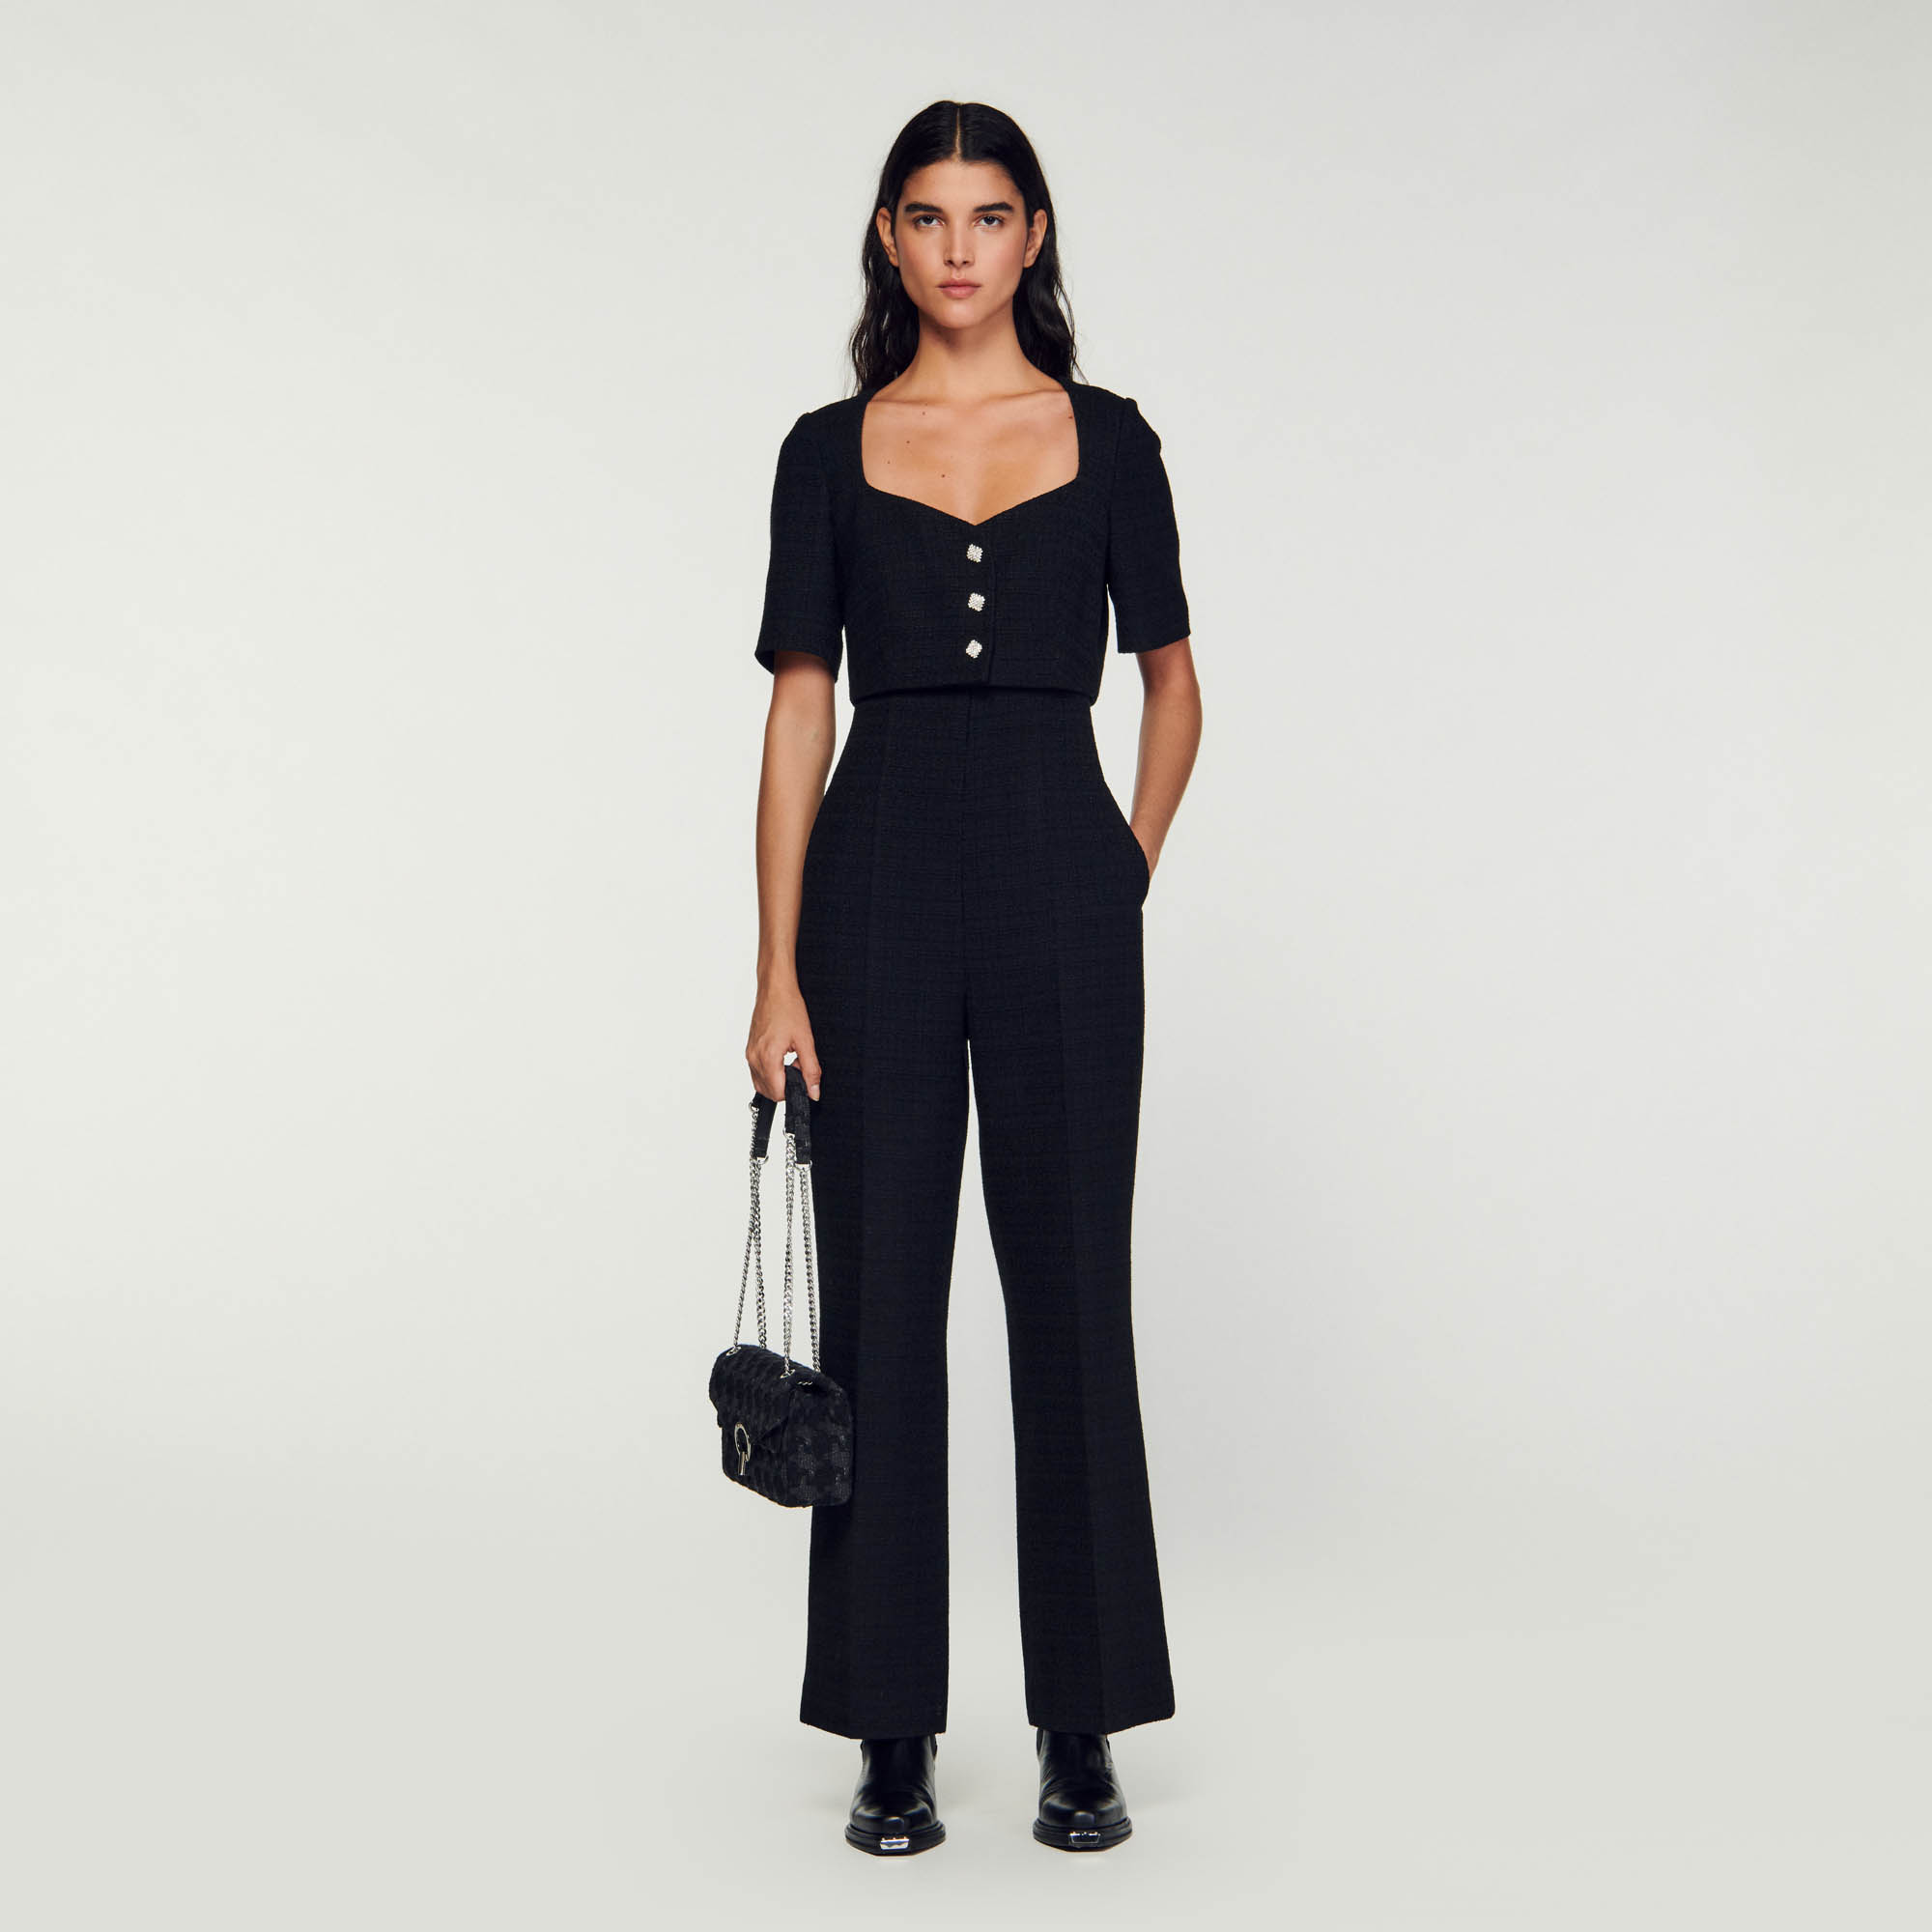 Sandro cotton 2-in-1 style tweed jumpsuit with a short top with a low-cut sweetheart neckline adorned with rhinestone jewels and pleated pants with slightly flared hems